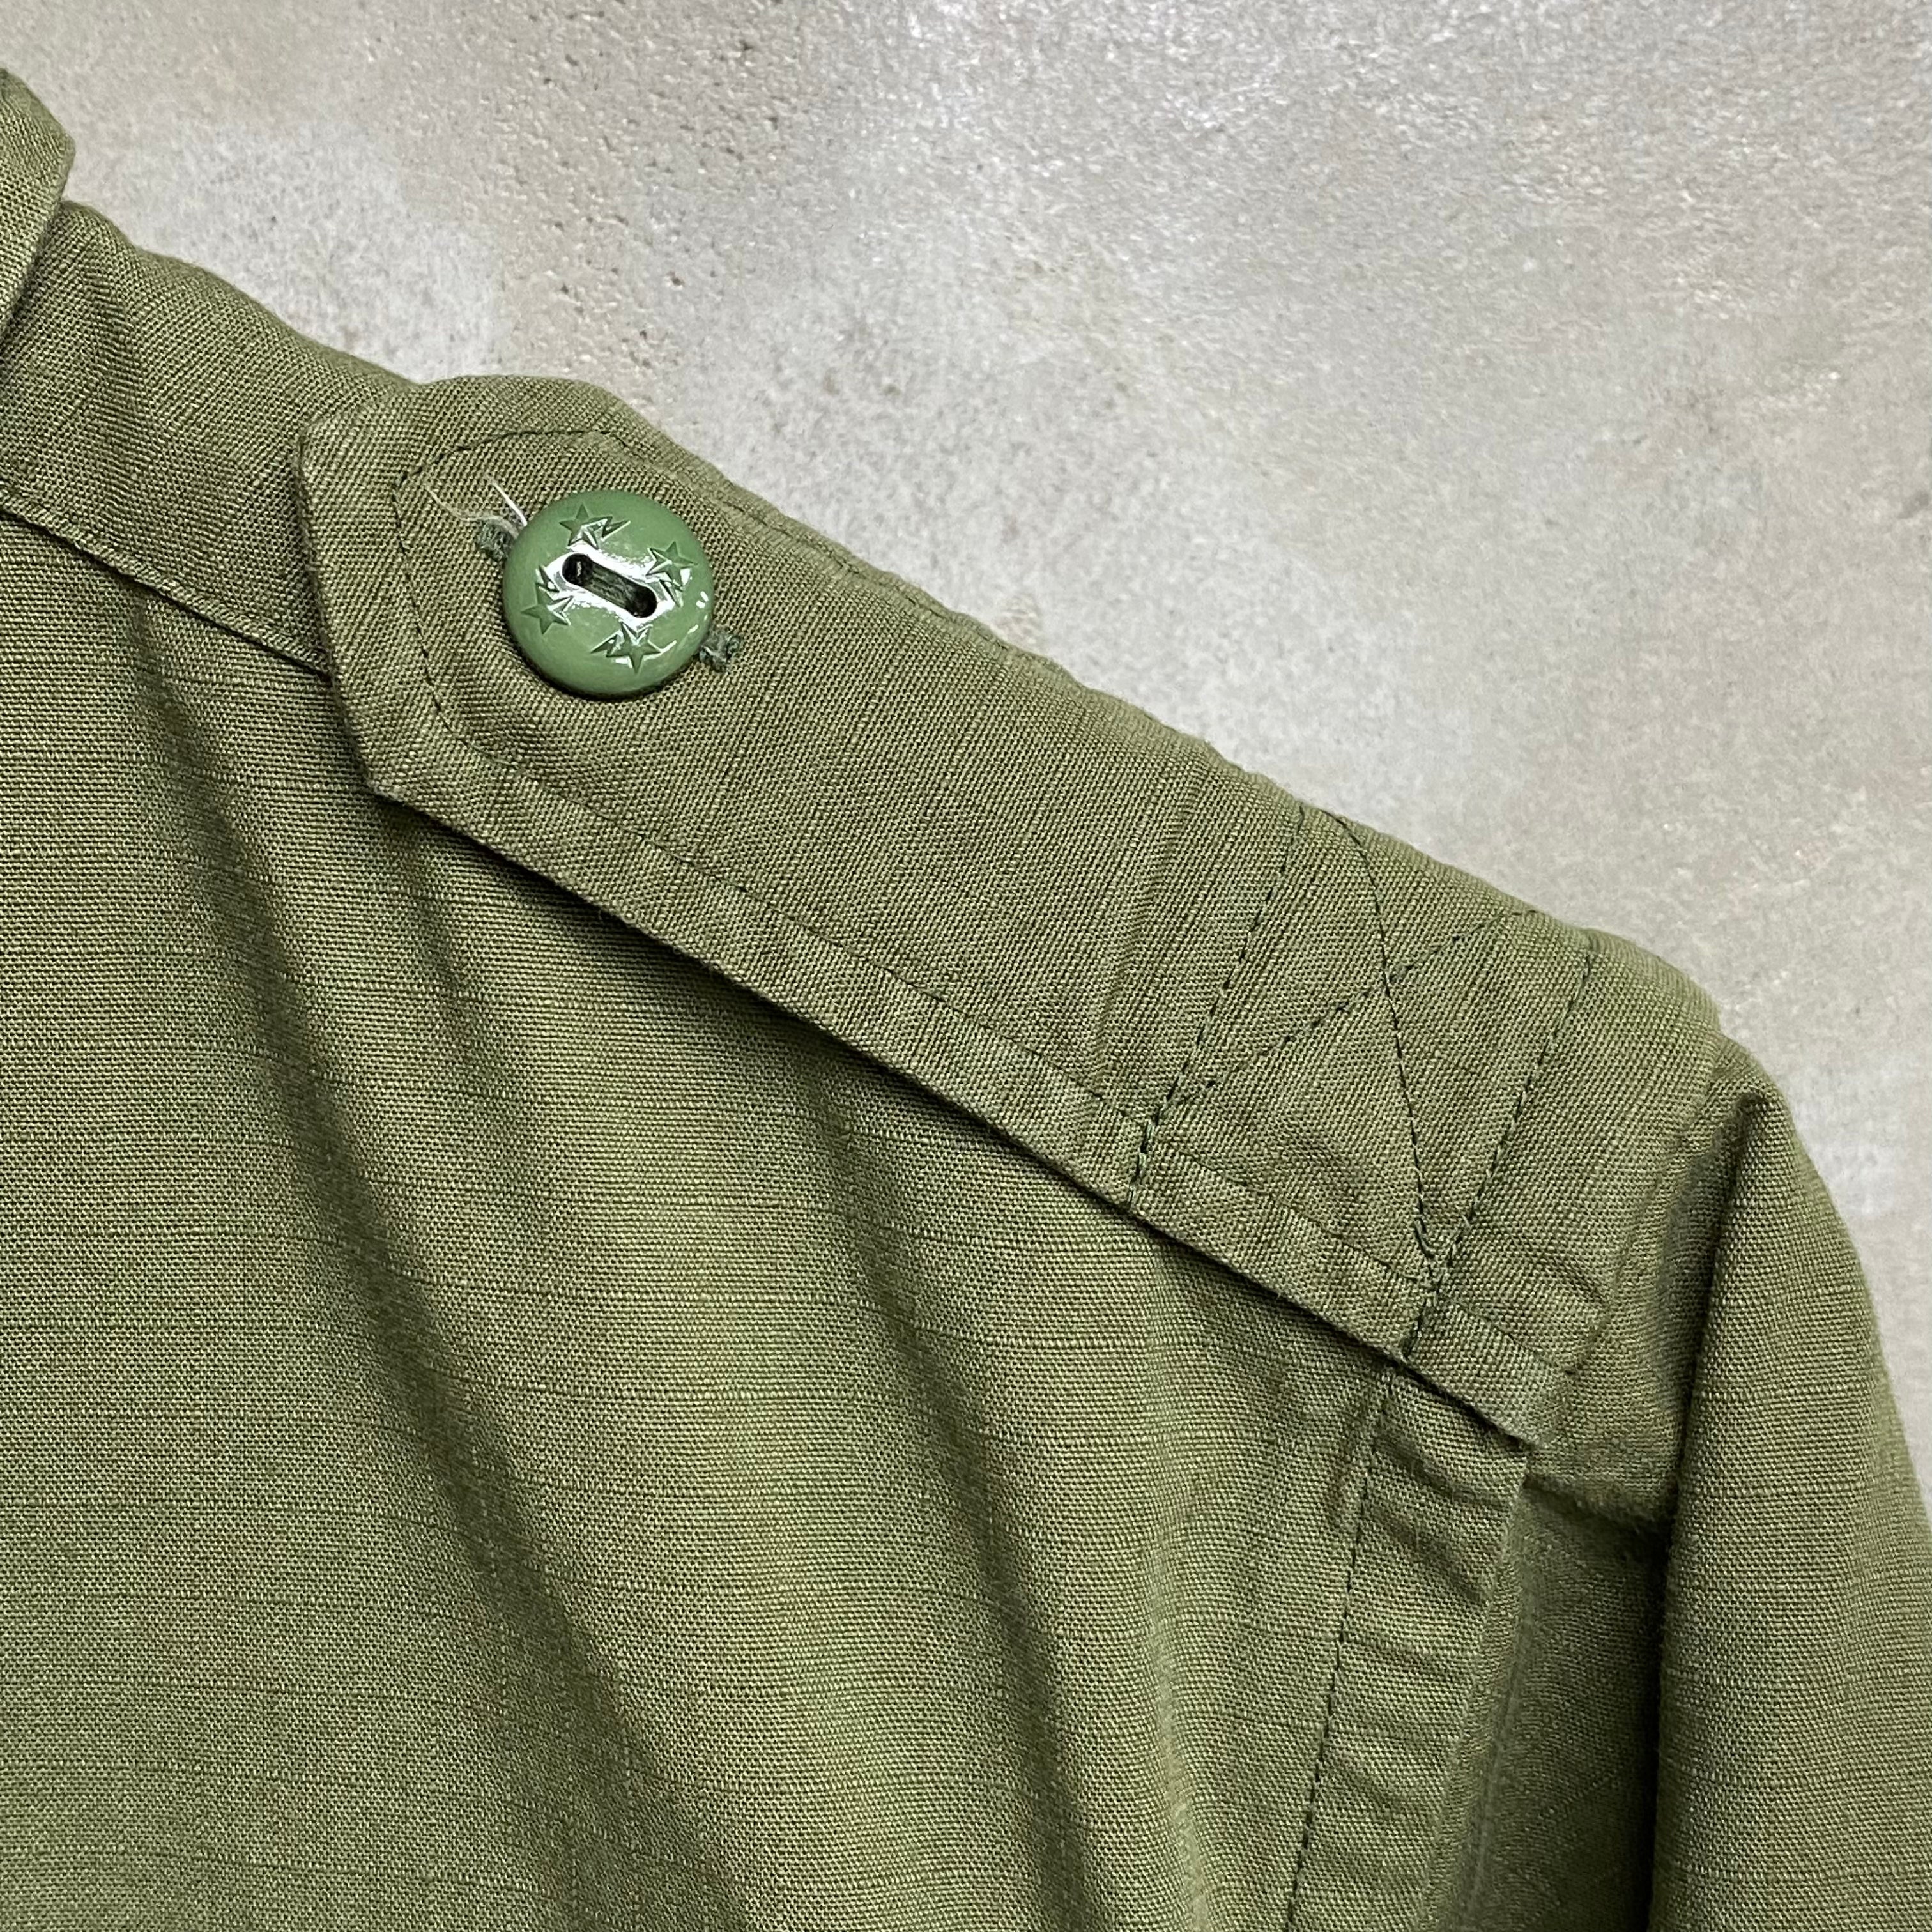 [ ONLY ONE ! ] A BATHING APE SHIRTS JACKET / ARCHIVE